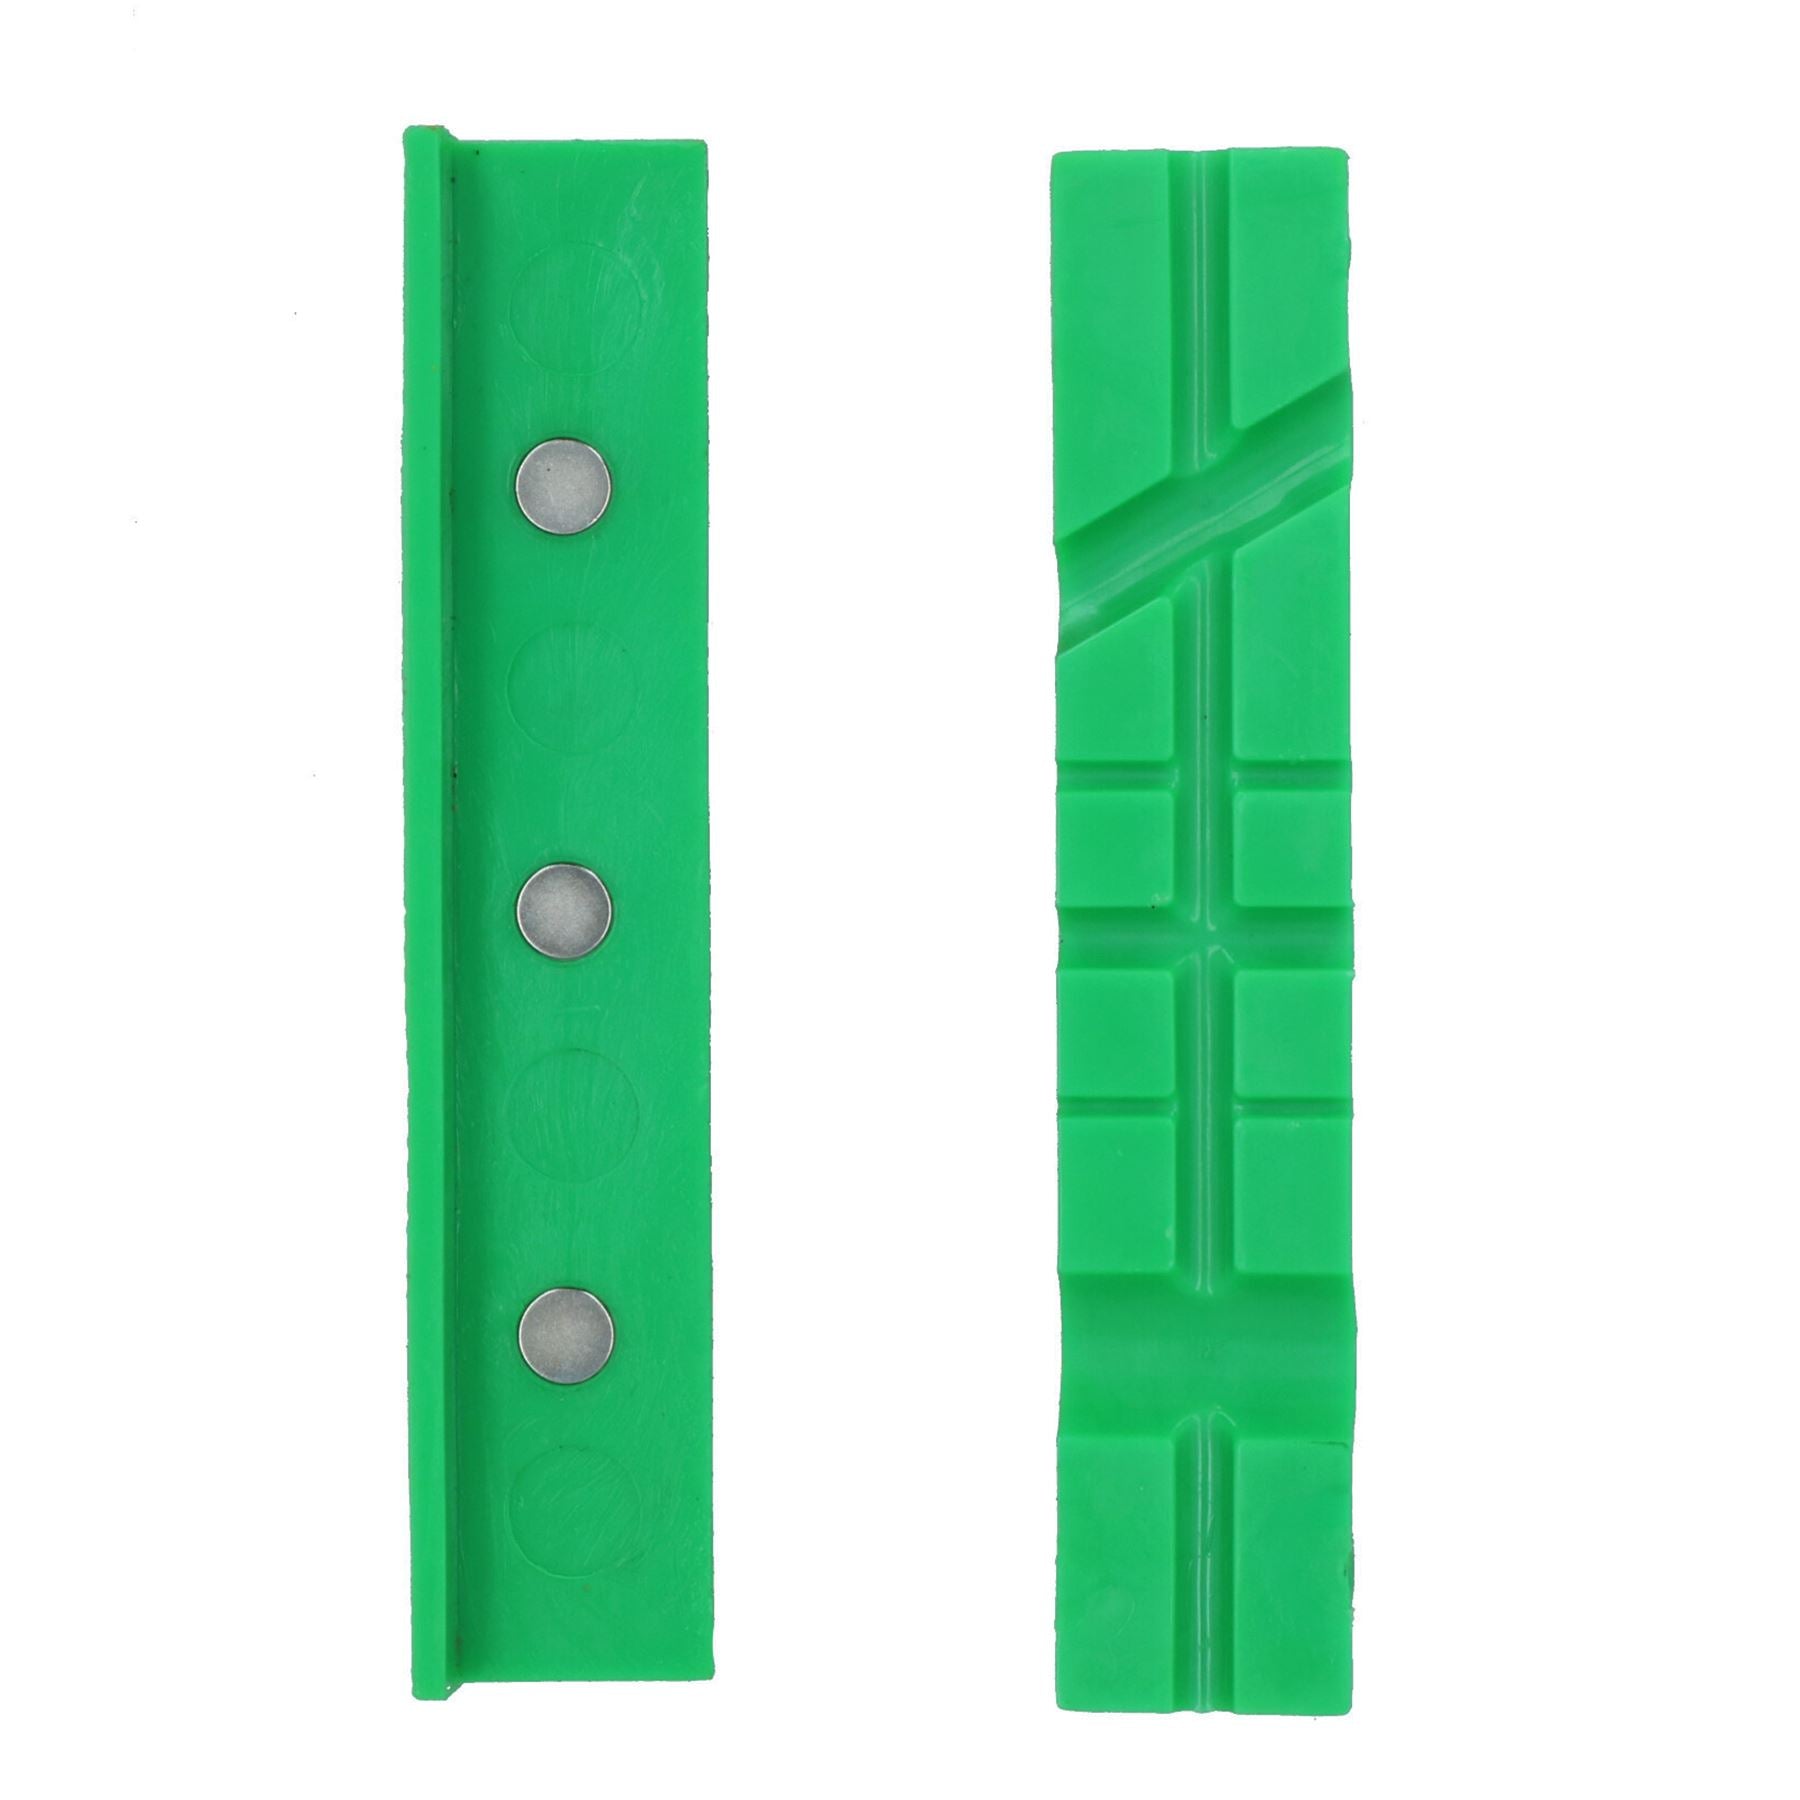 6" Magnetic Multi Grove Soft face Jaws Pads for Bench Vice Non marking Green